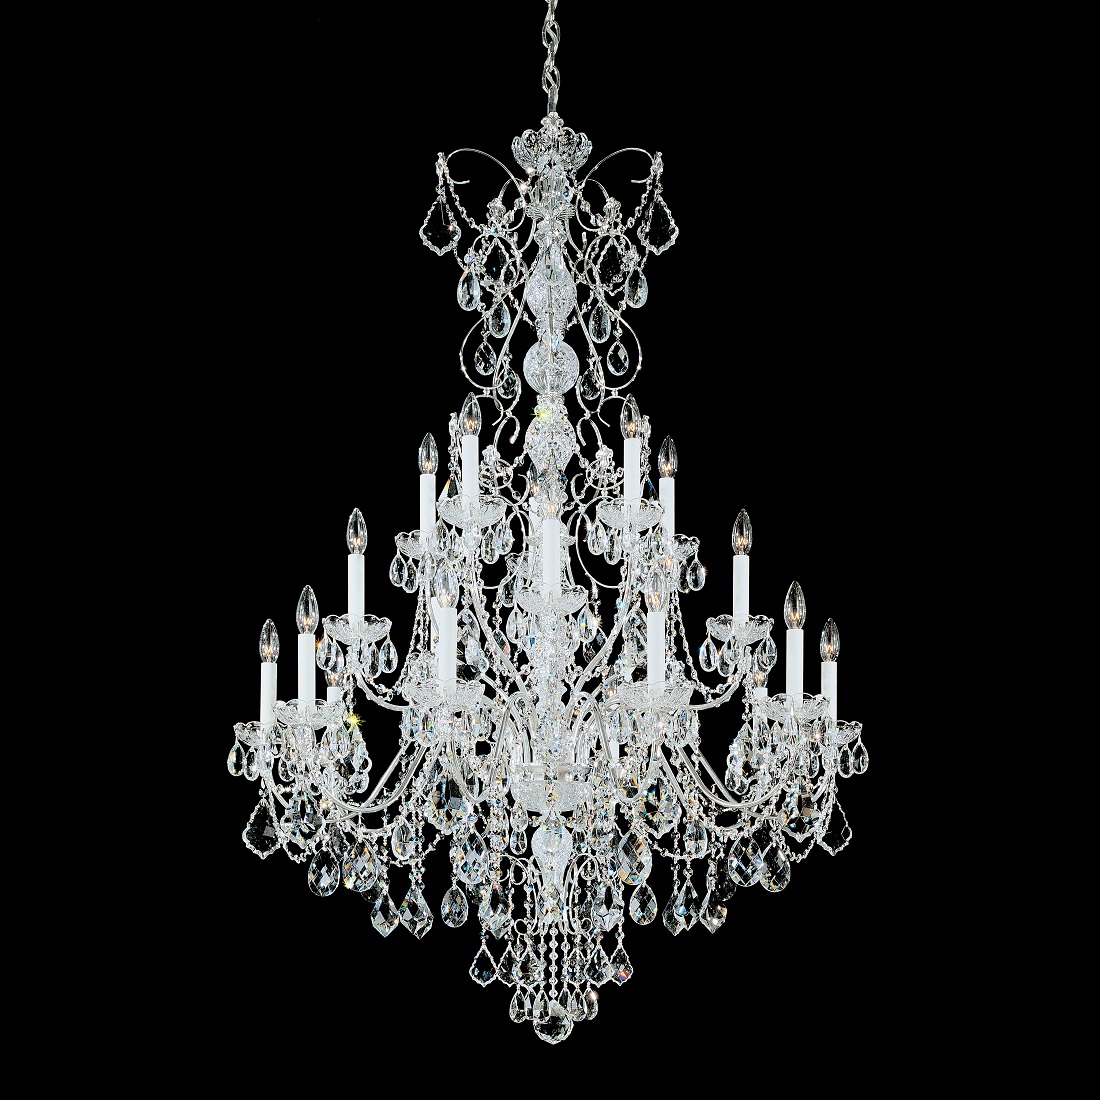 Schonbek Chandeliers on Sale Brooklyn,New York by Accentuations Brand   